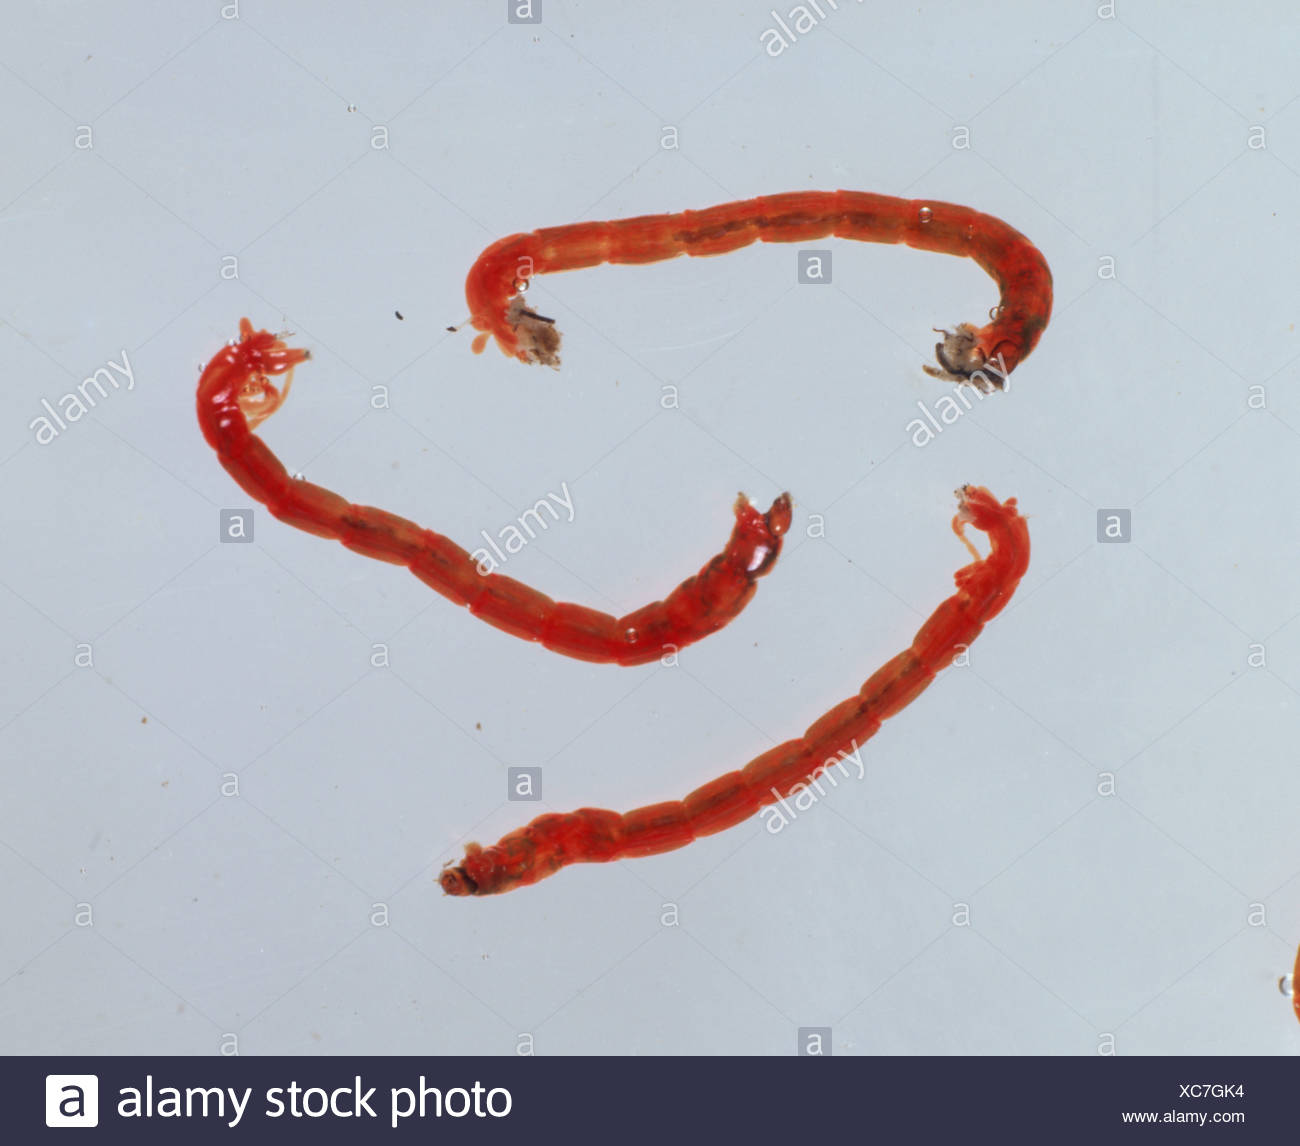 Chironomid High Resolution Stock Photography and Images - Alamy